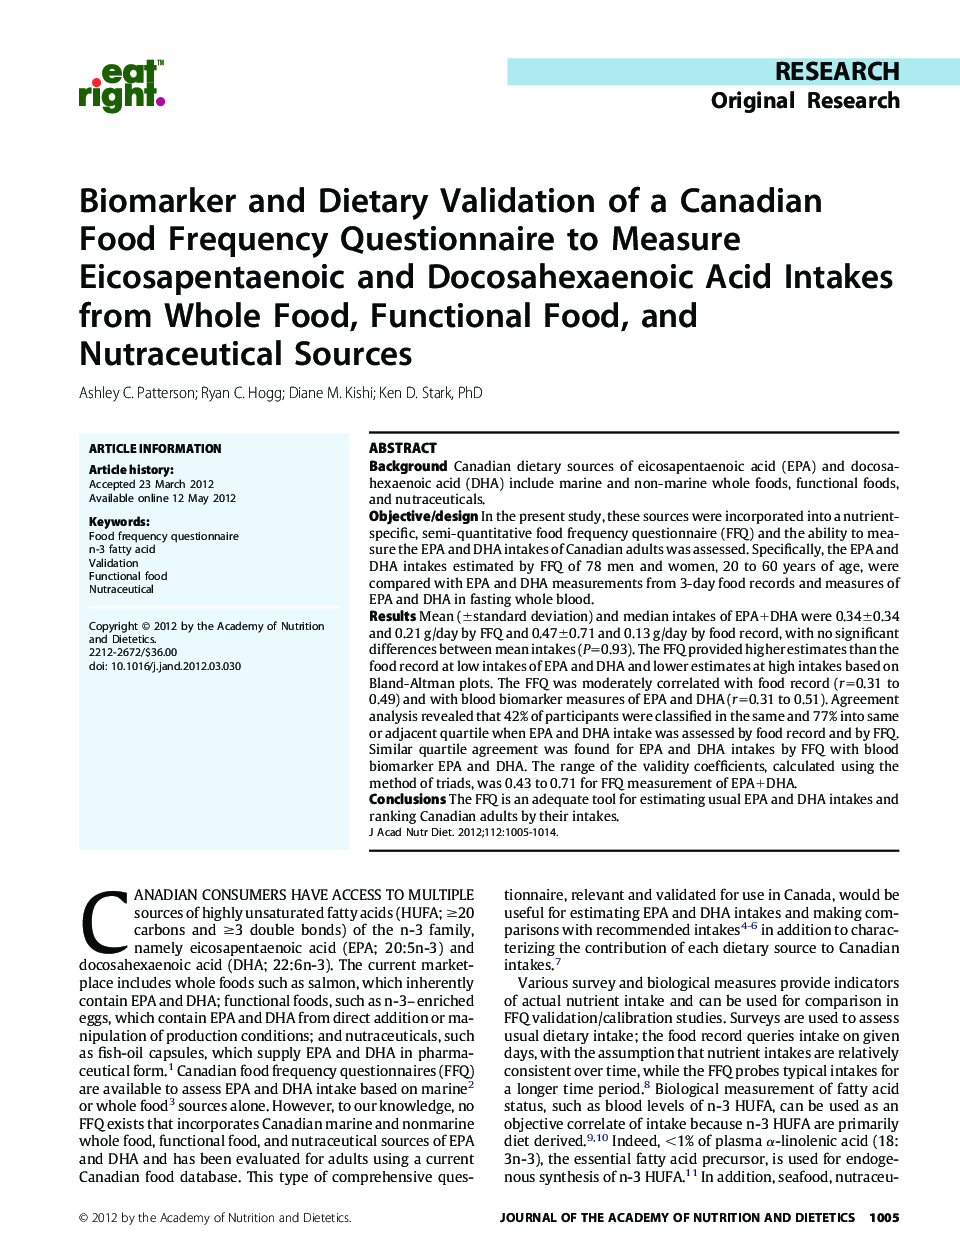 Biomarker and Dietary Validation of a Canadian Food Frequency Questionnaire to Measure Eicosapentaenoic and Docosahexaenoic Acid Intakes from Whole Food, Functional Food, and Nutraceutical Sources 